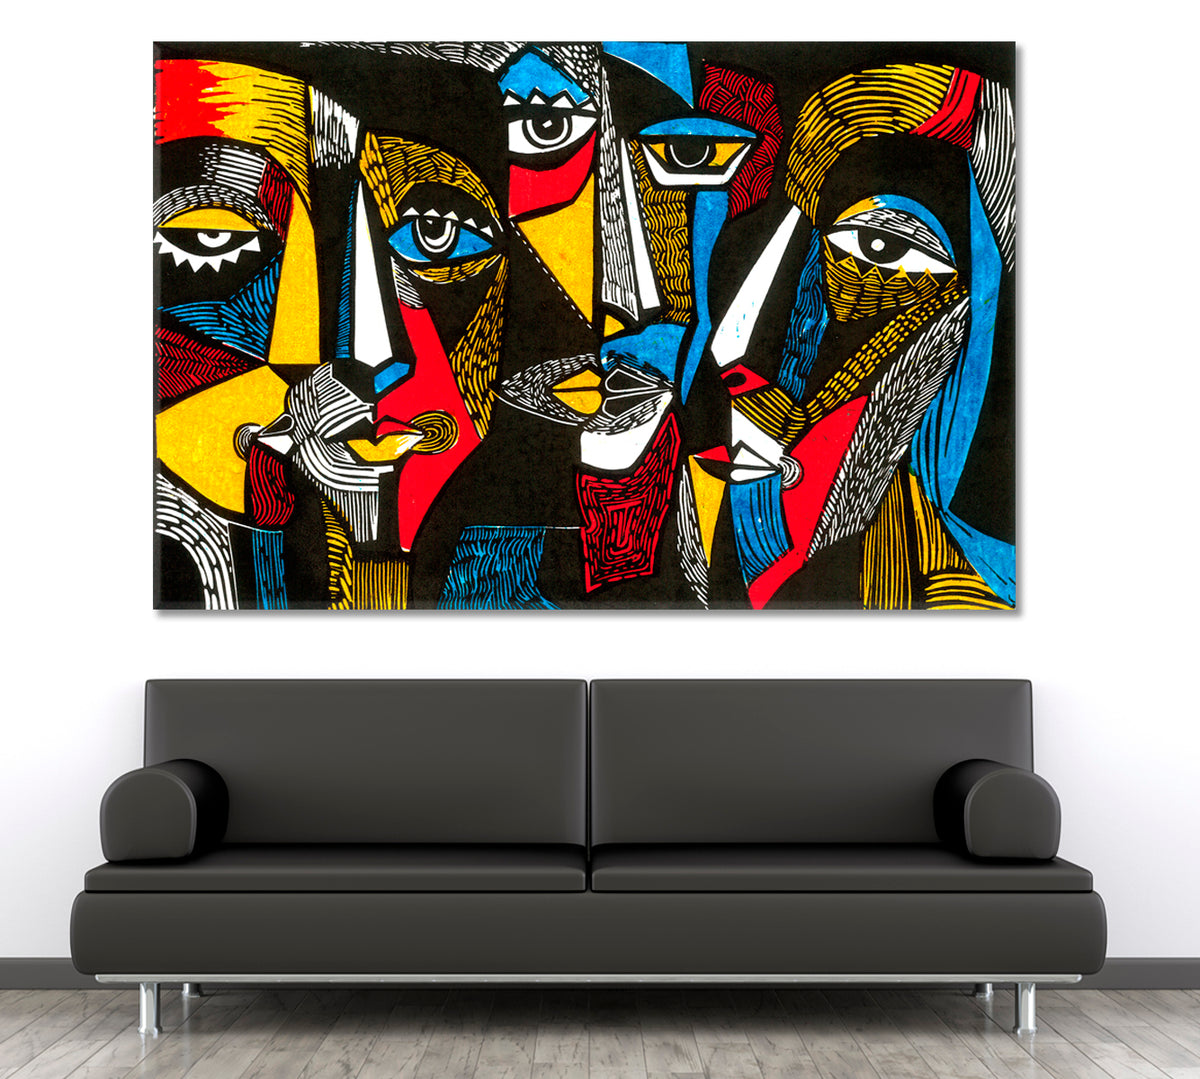 Abstract Surreal-colored Faces Yellow Red White Blue Black Abstract Art Print Artesty 1 panel 24" x 16" 